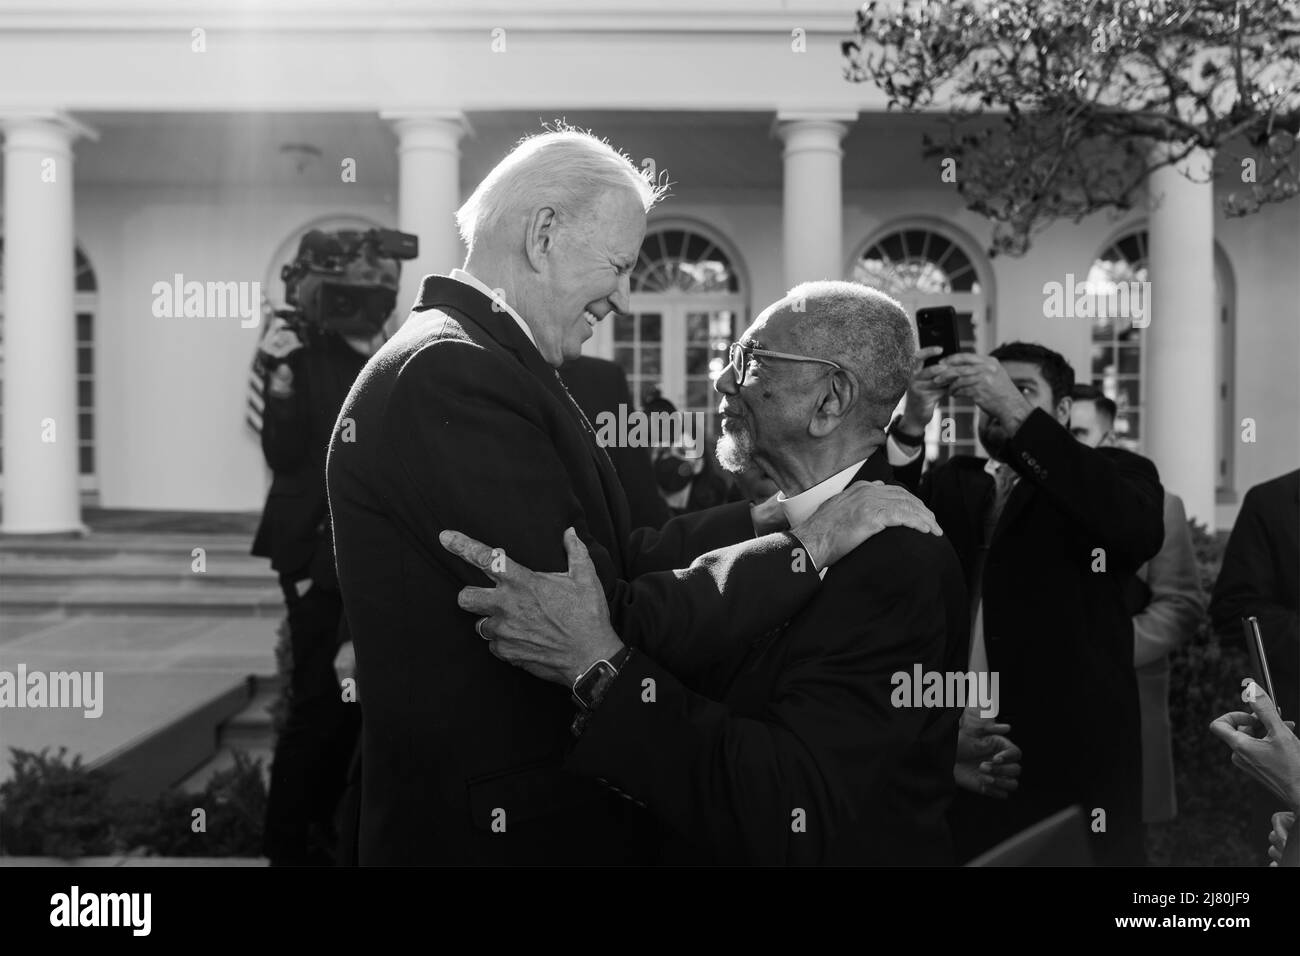 U.S President Joe Biden, embraces Rep. Bobby Rush of Illinois, during the signing ceremony for H.R. 55, the Emmett Till Anti-lynching Act, in the Rose Garden of the White House, March 29, 2022 in Washington, D.C. Stock Photo